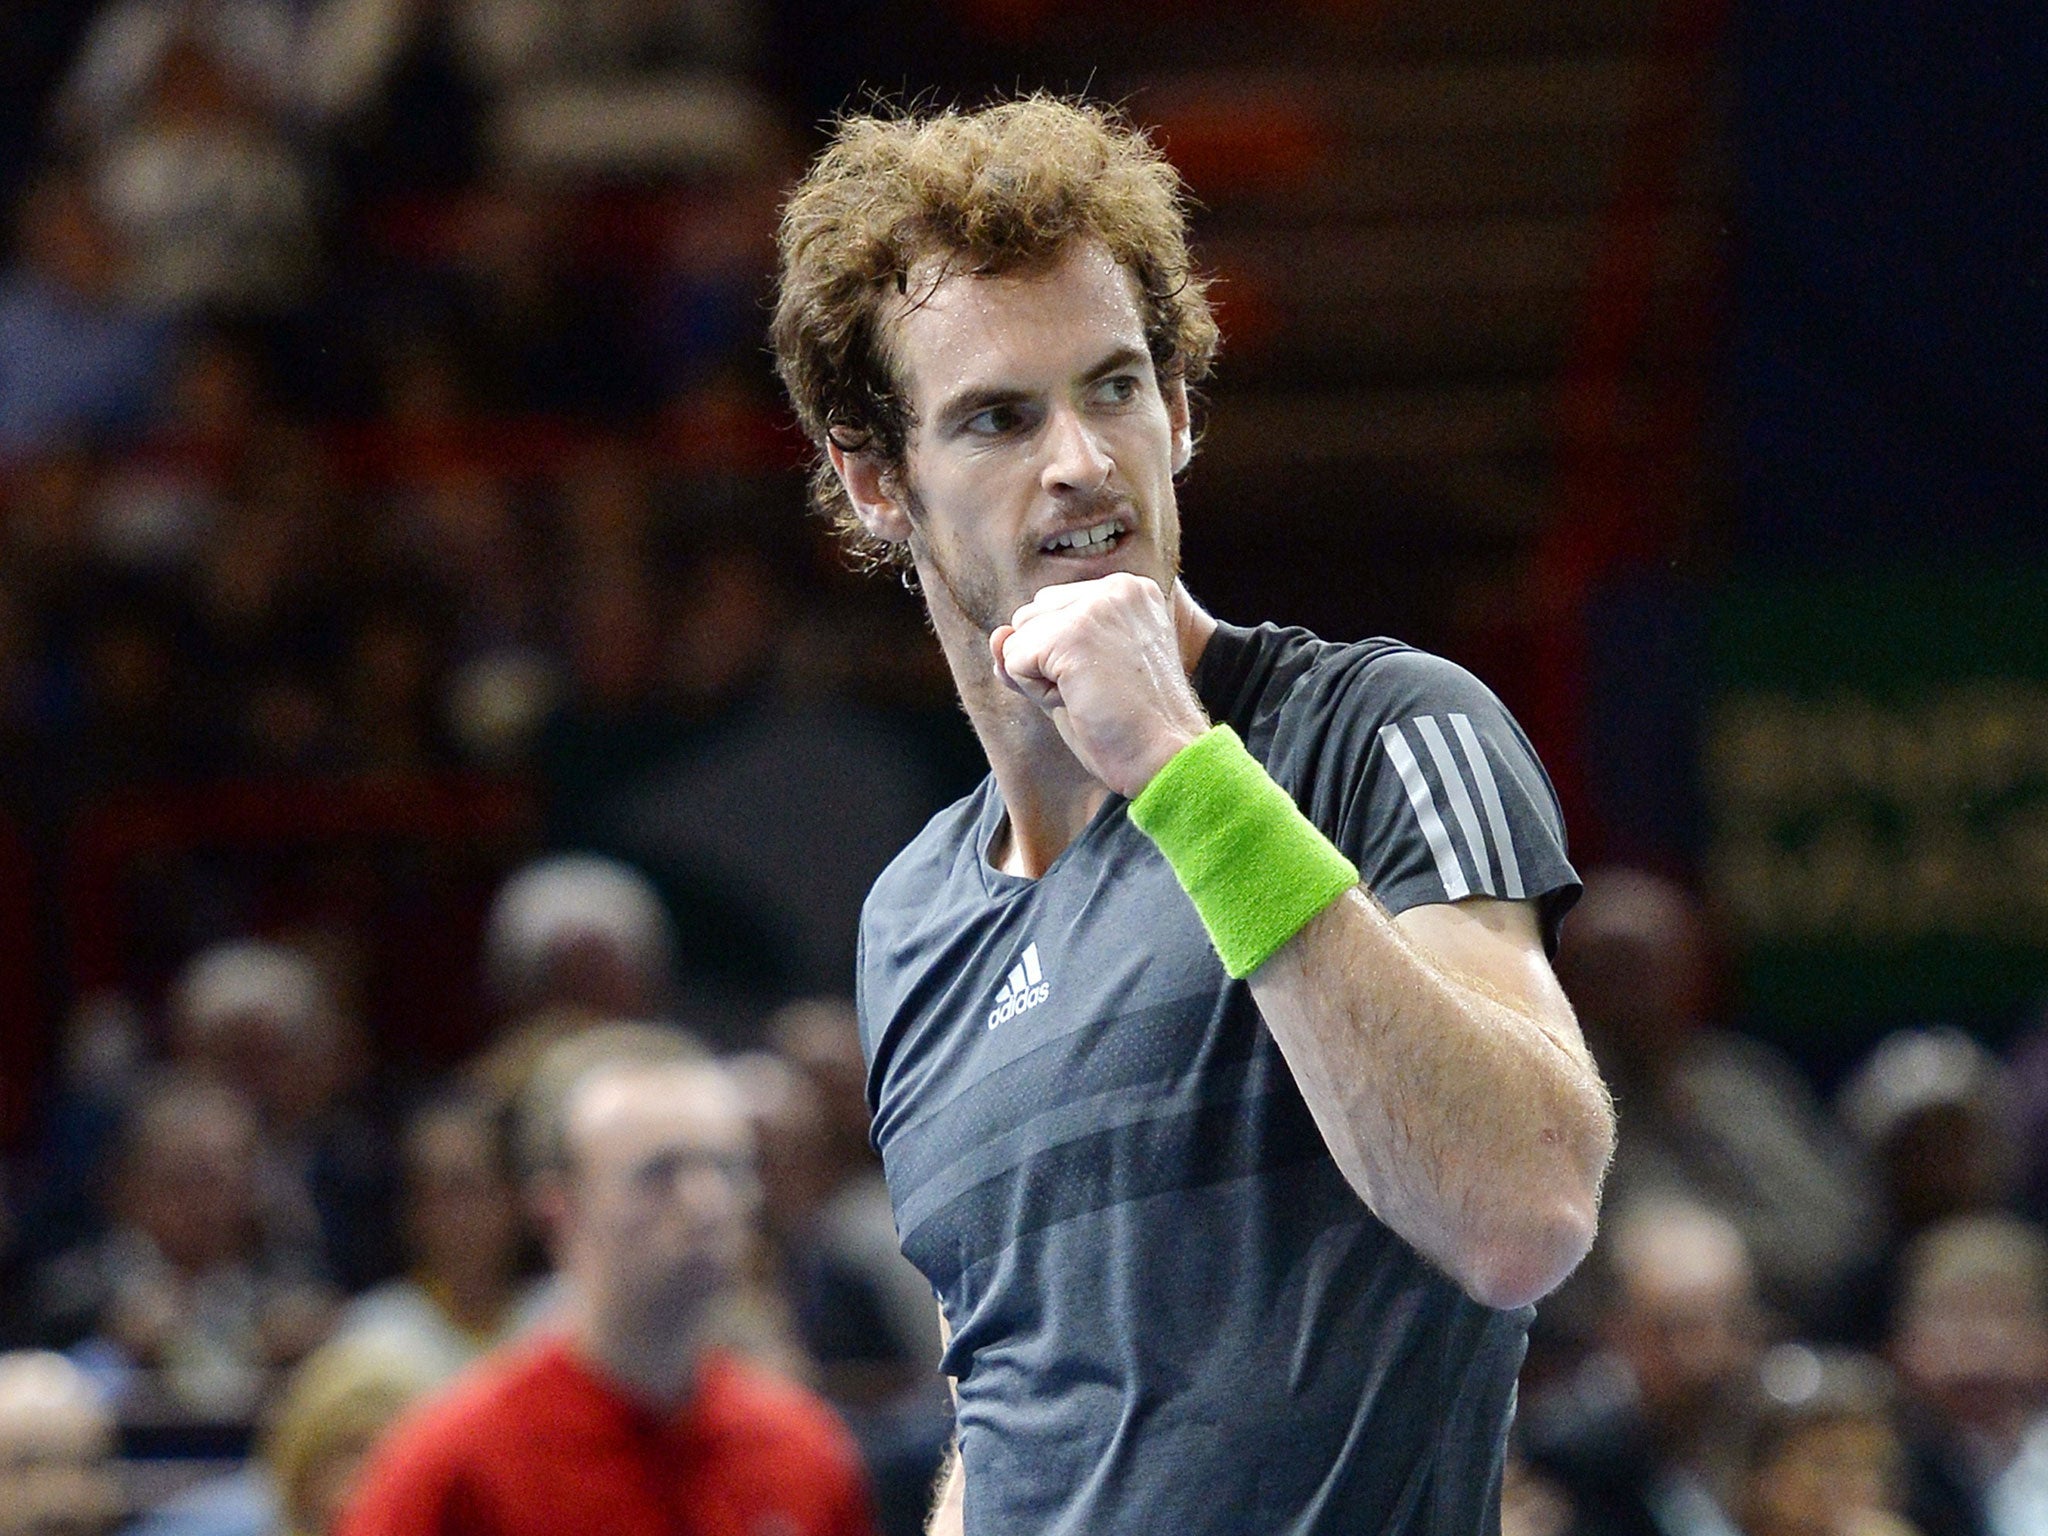 Andy Murray celebrates his win over Julien Benneteau